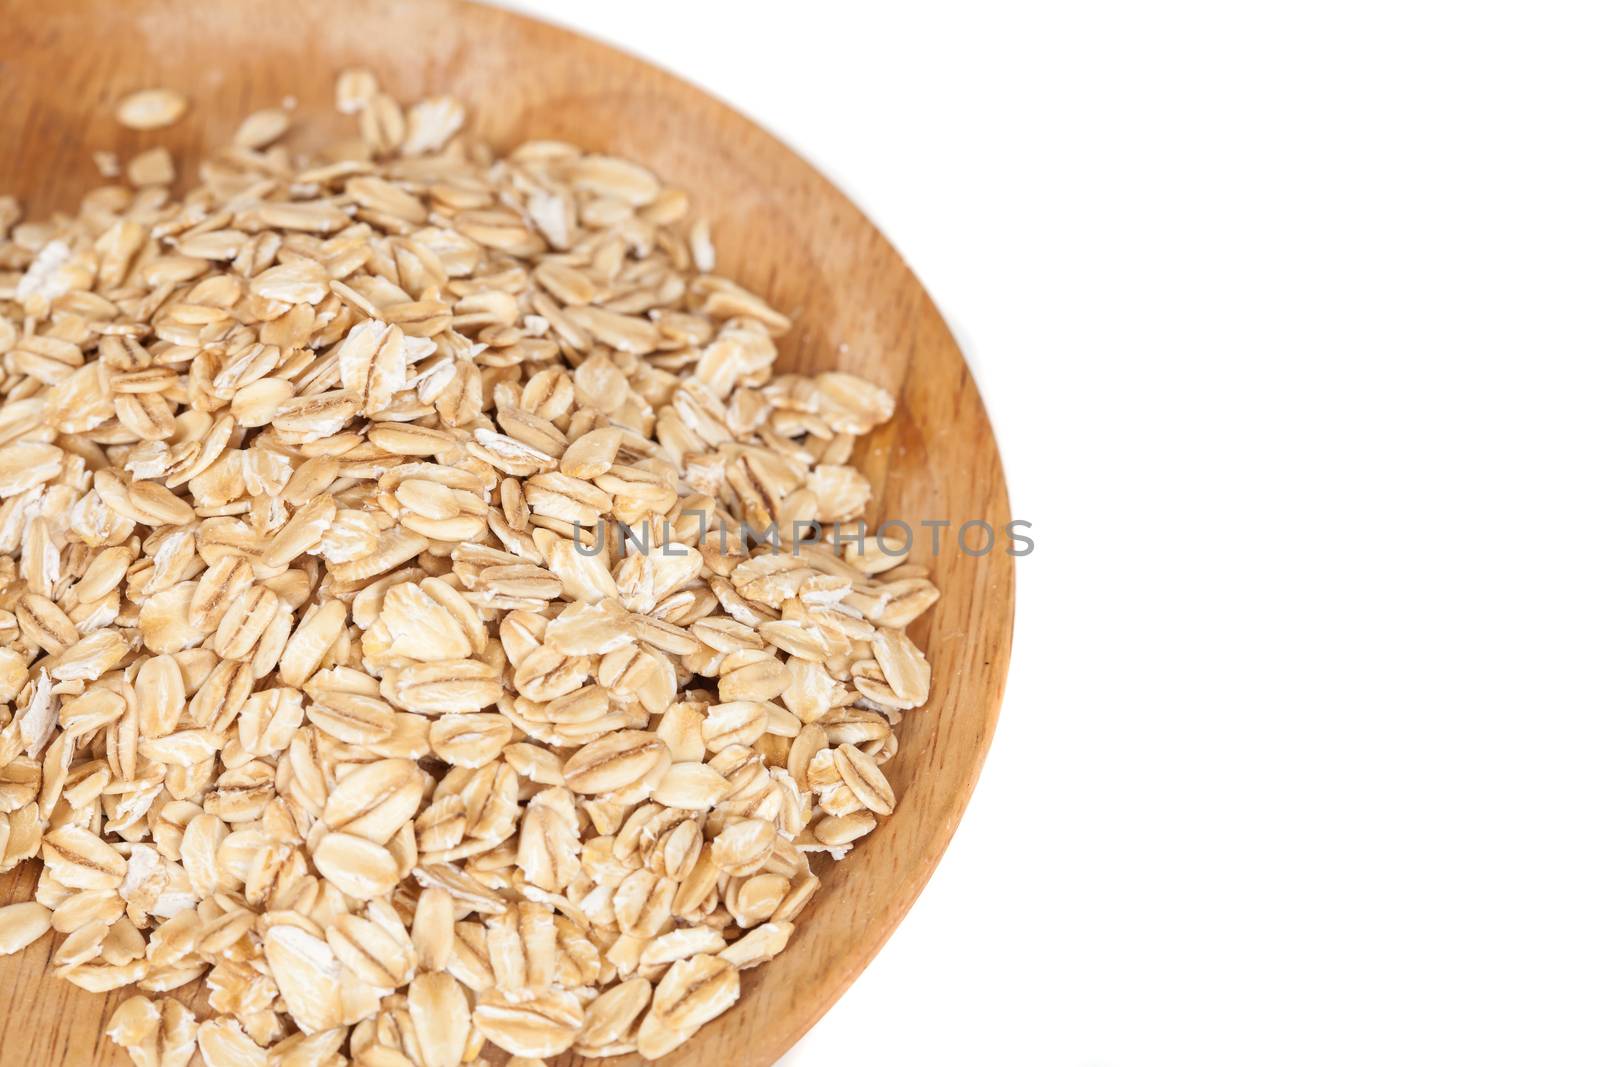 dish wood with oats flakes pile by amnarj2006